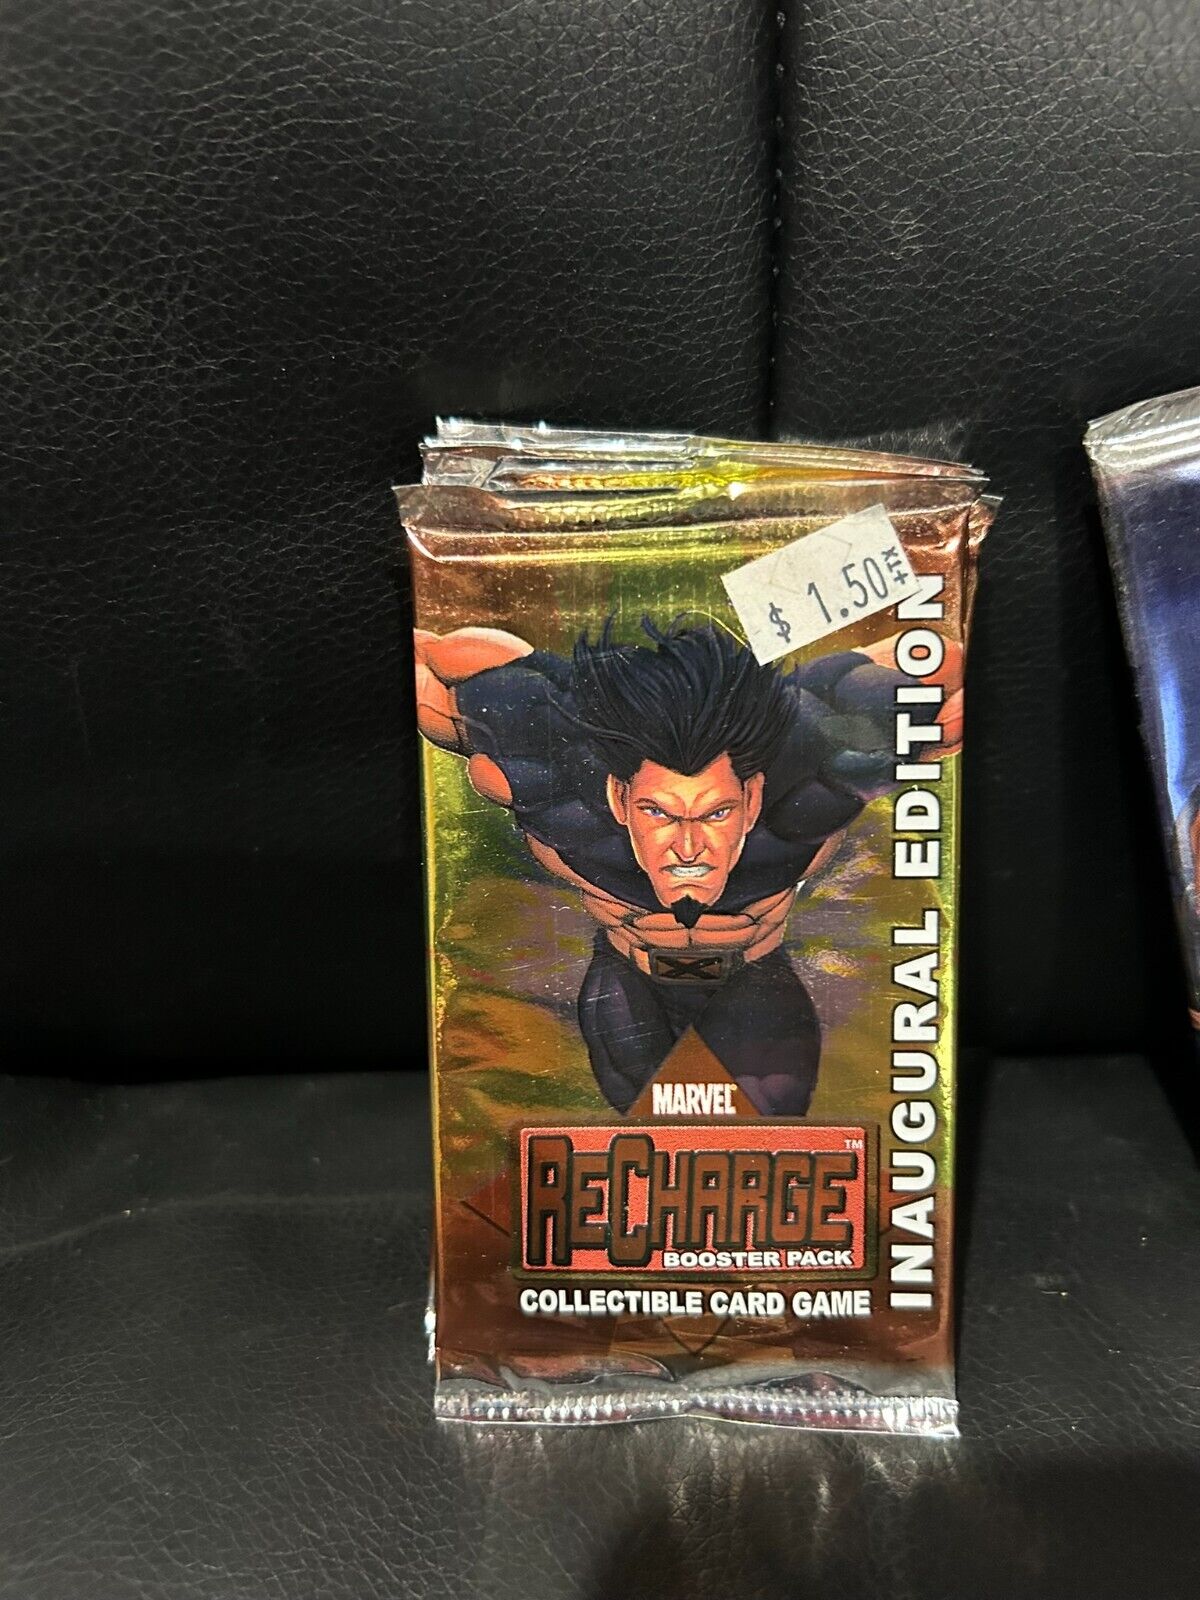 Marvel Recharge and Recharge2 Booster Packs CCG